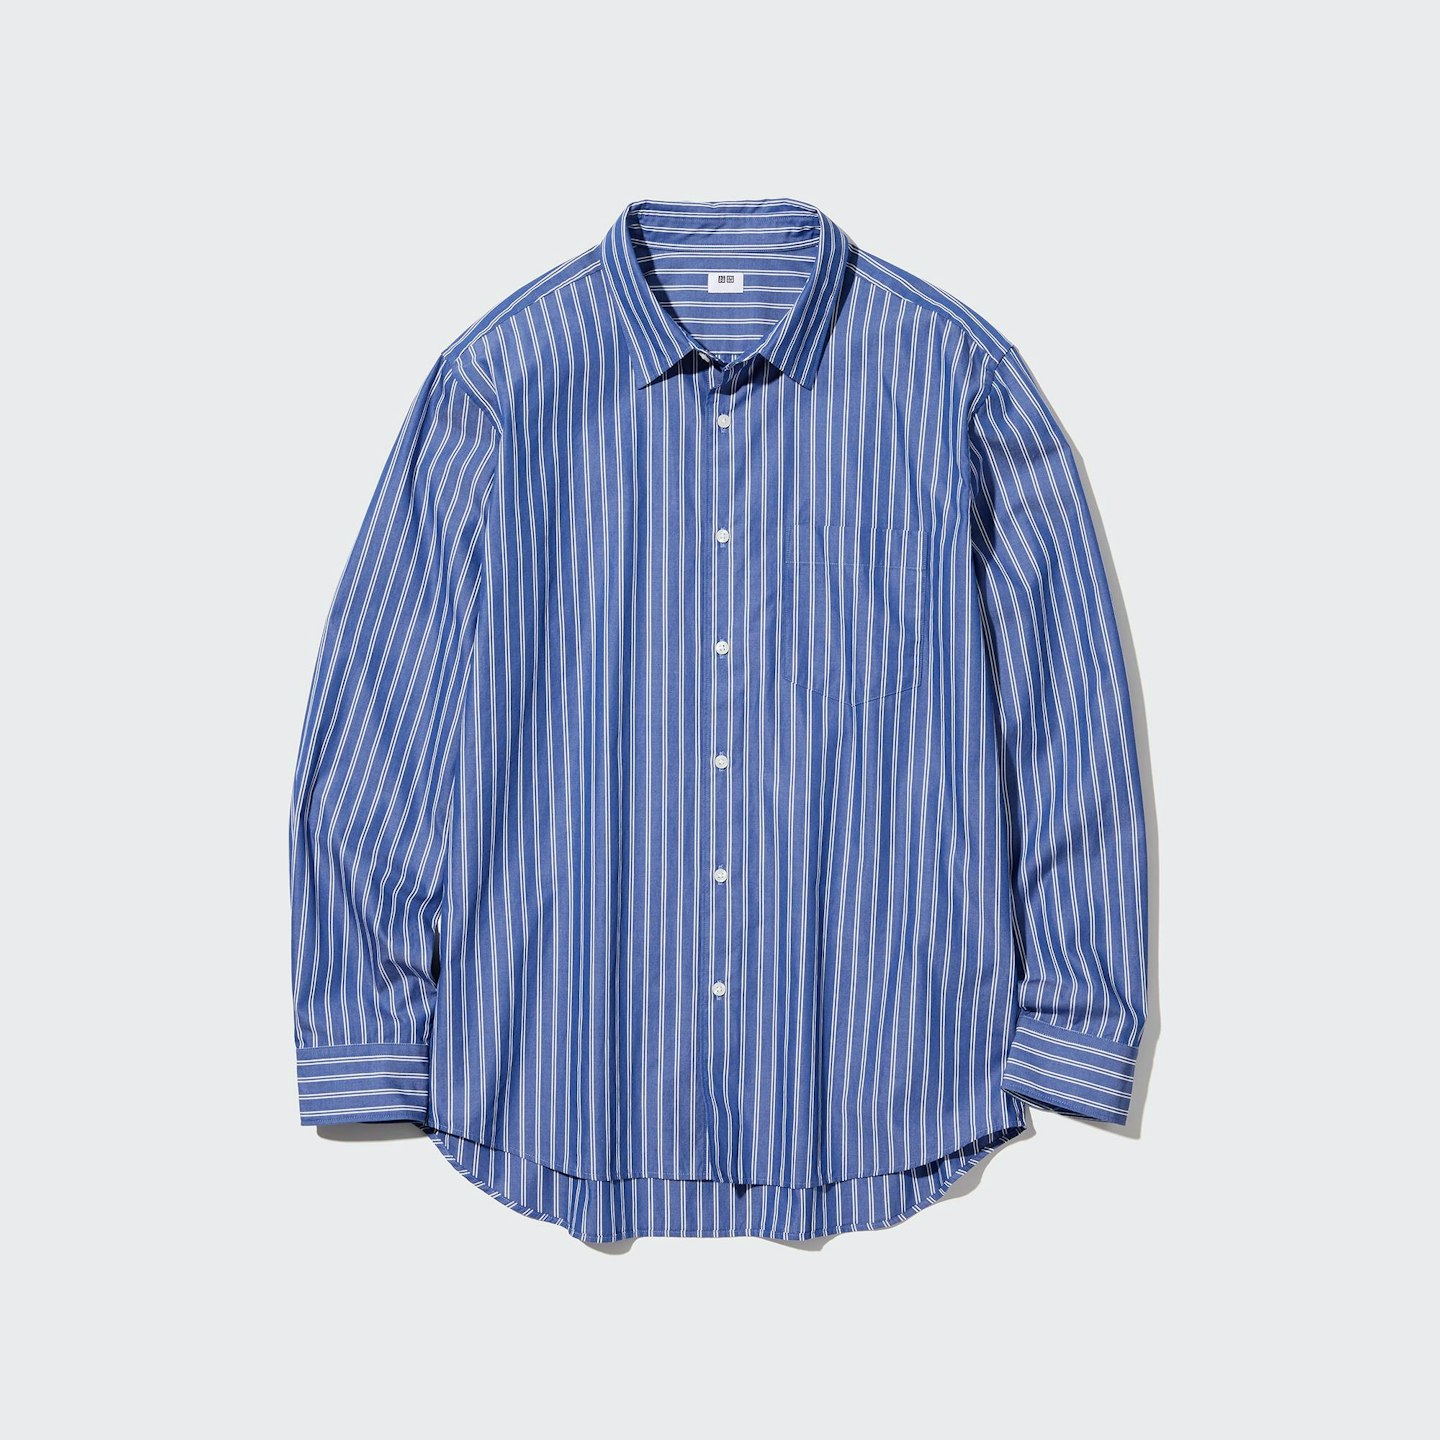 Uniqlo, Extra Fine Cotton Broadcloth Regular Fit Striped Shirt